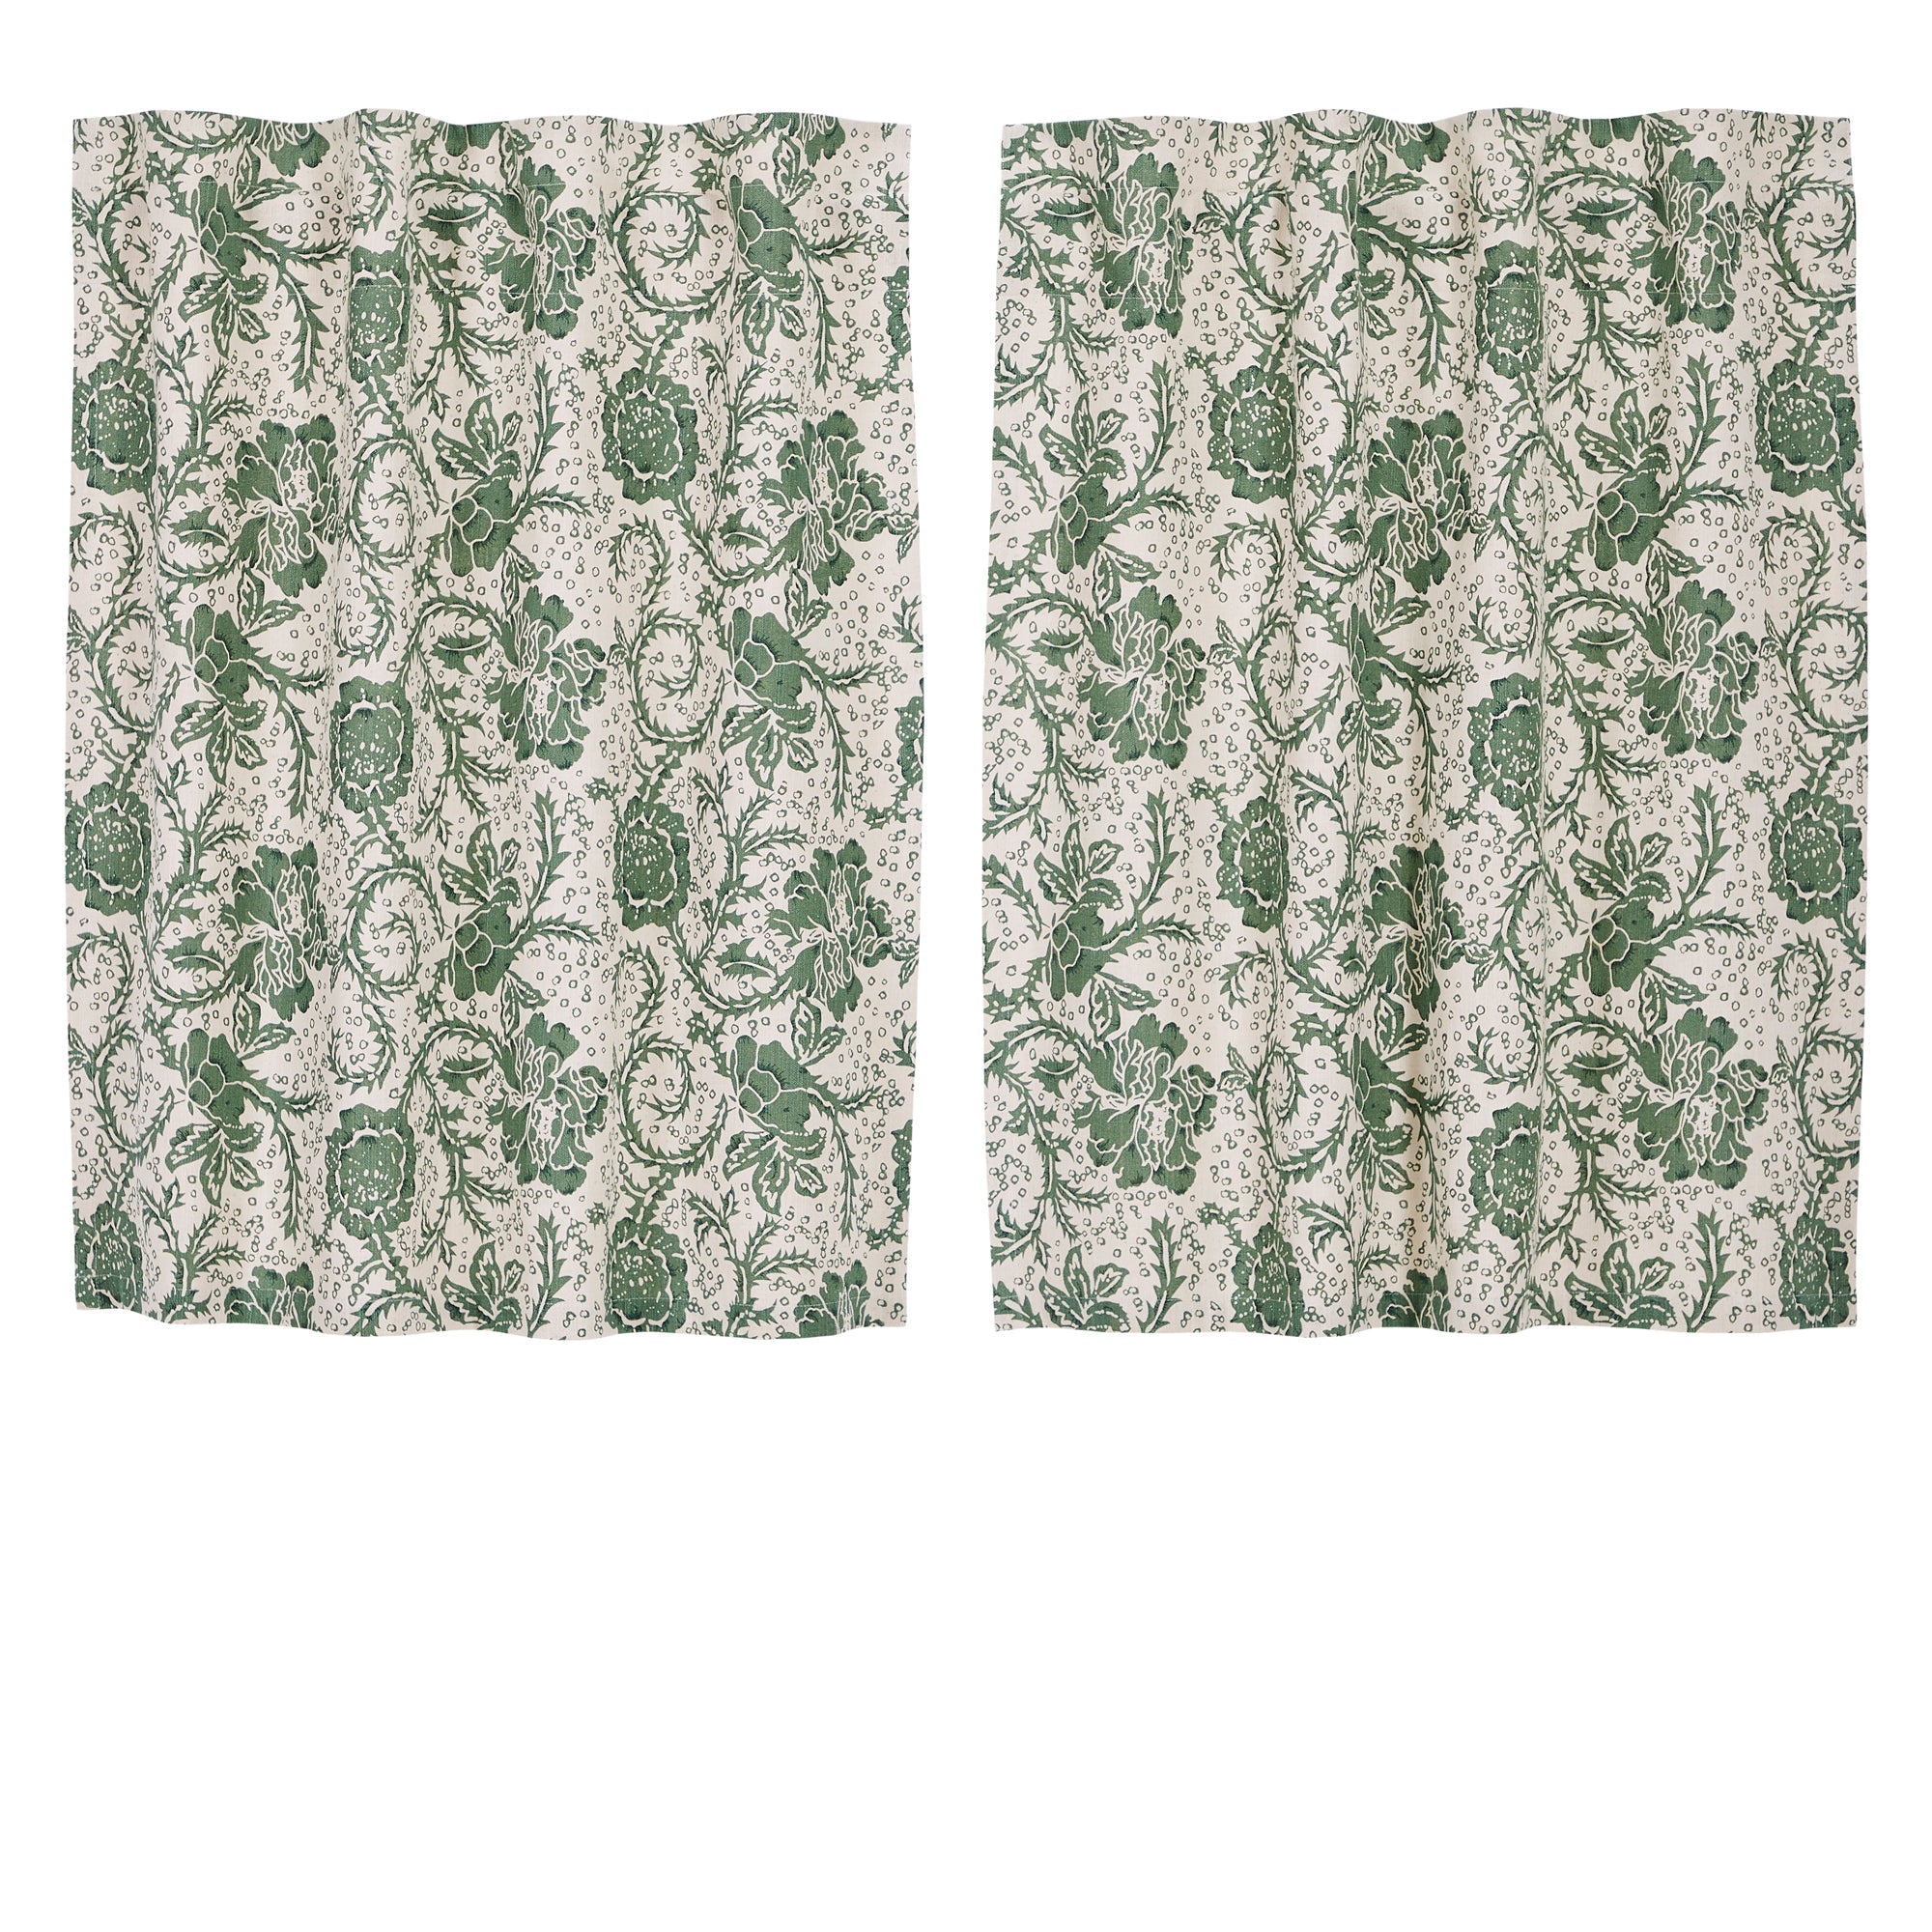 Dorset Green Floral Tier Curtain Set of 2 L24xW36 VHC Brands